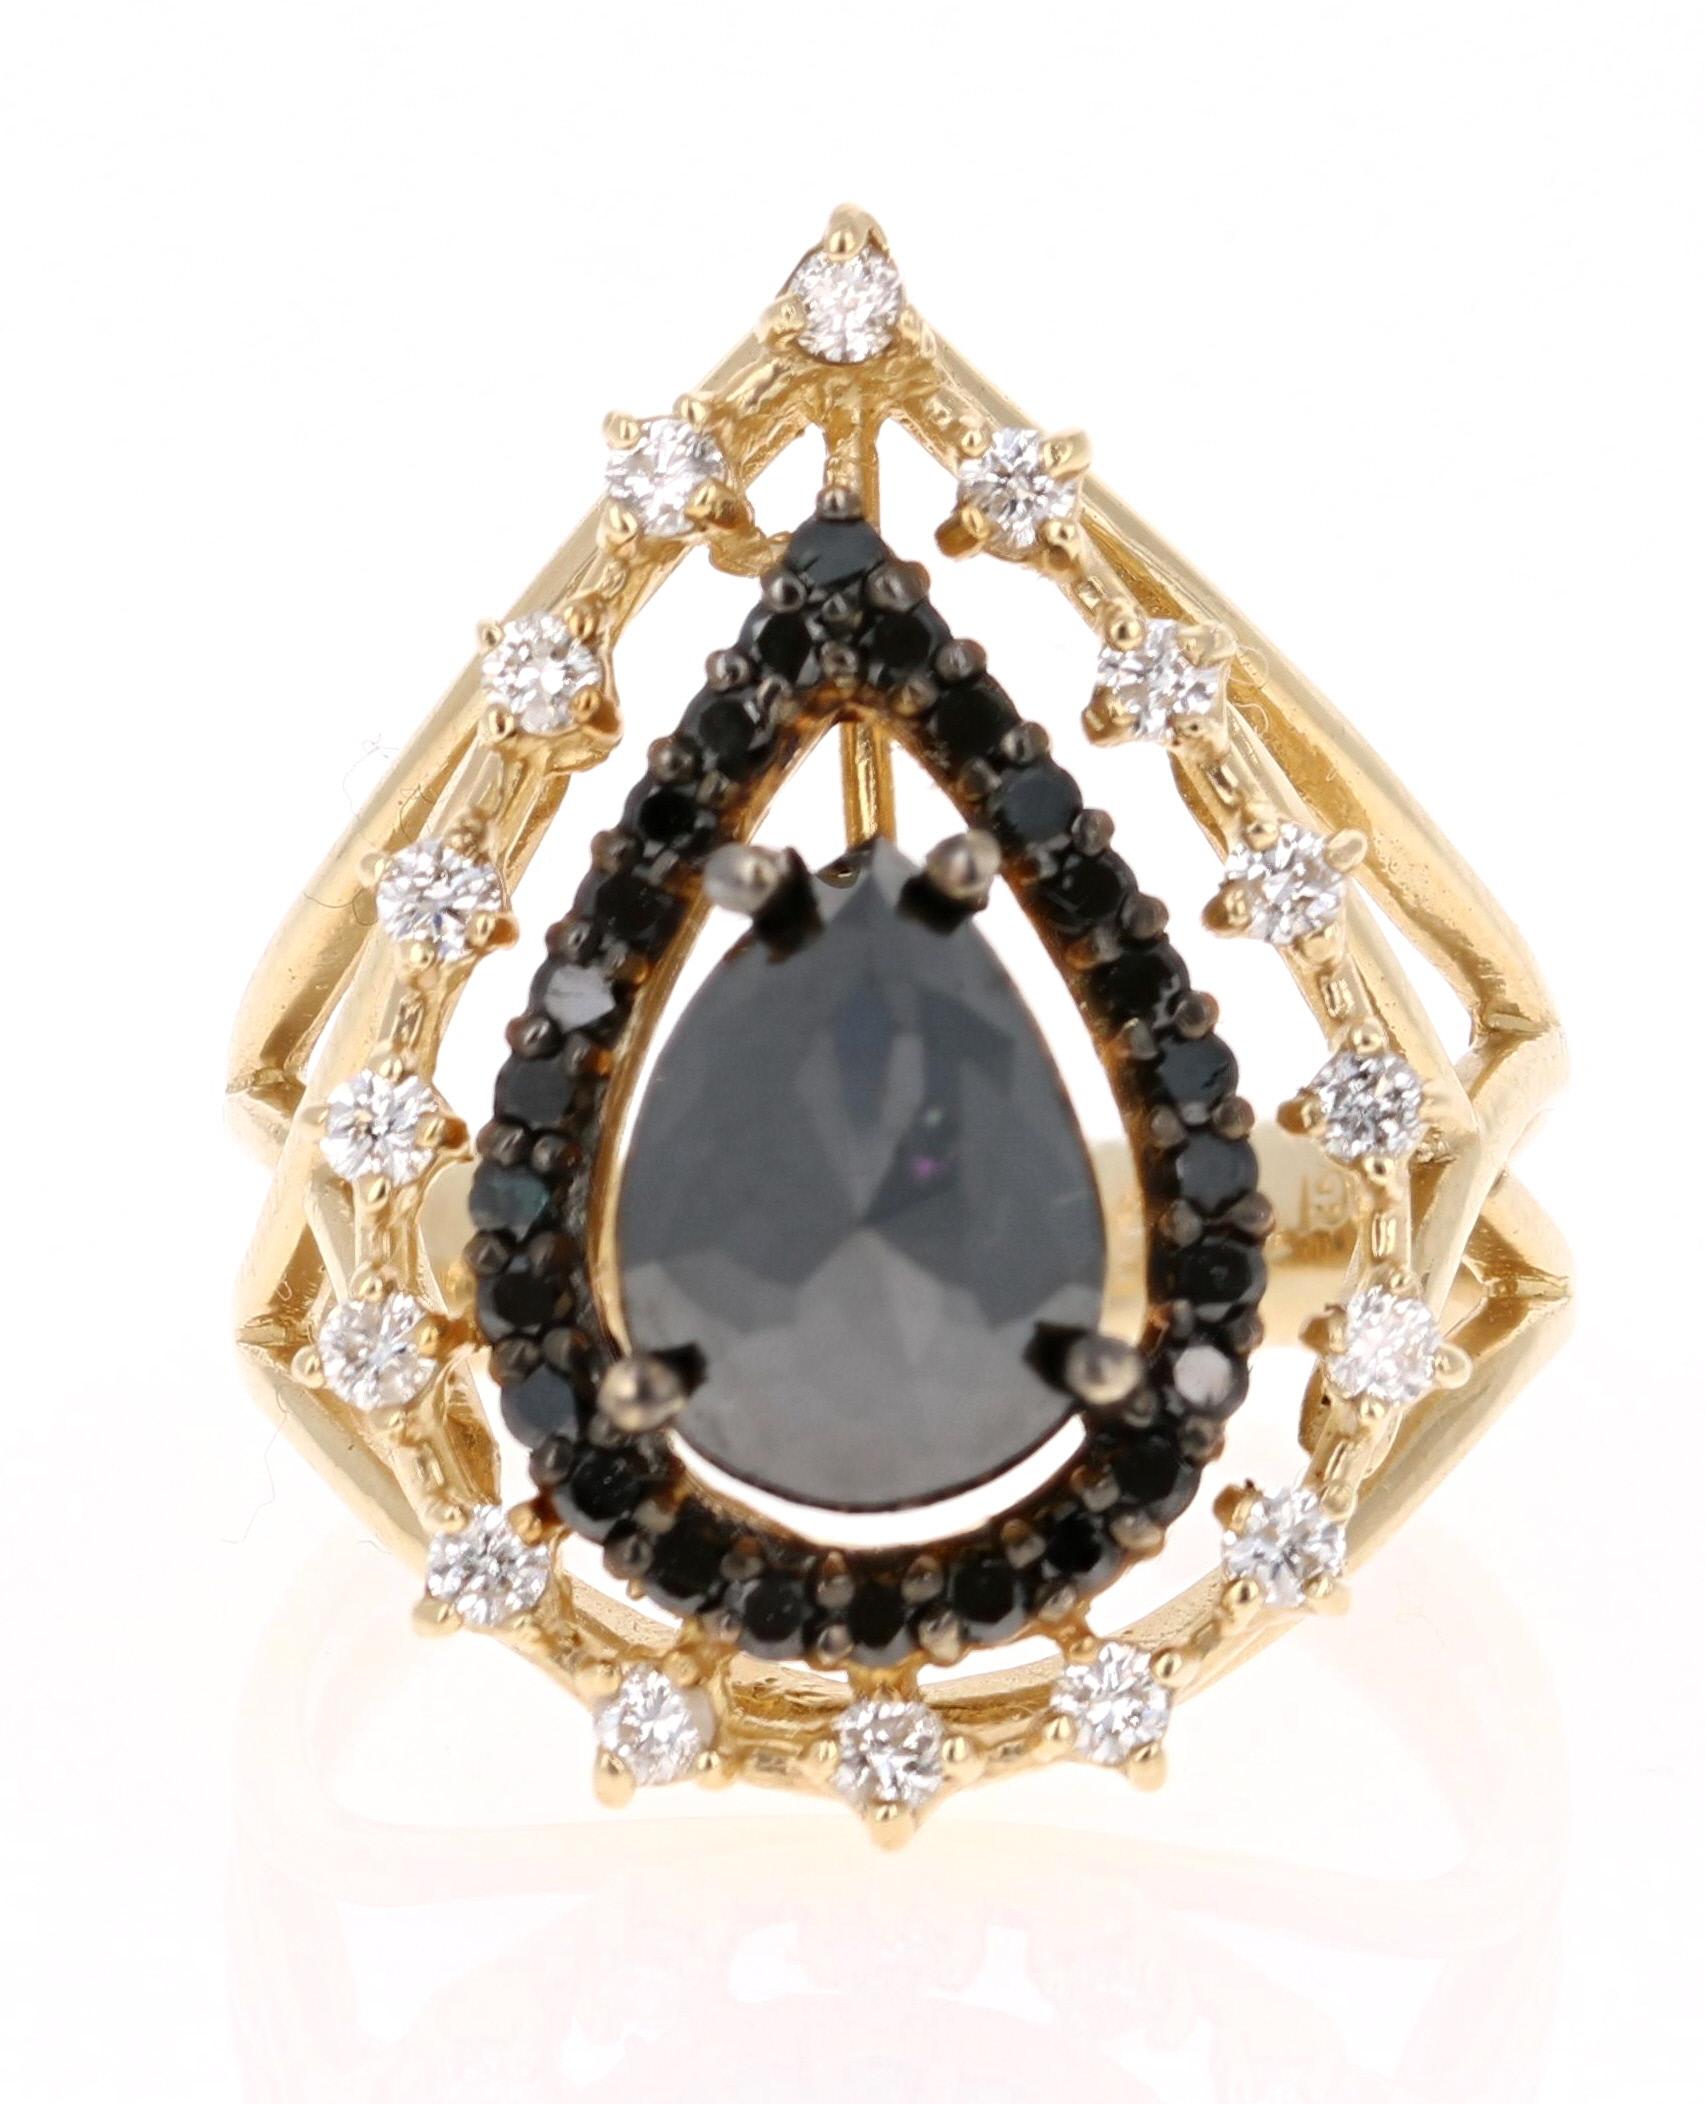 2.86 Carat Pear Cut Black Diamond Yellow Gold Cocktail Ring!

Stunning Victorian Inspired Cocktail Ring. There is a 2.19 Carat Pear Cut Black Diamond set in the center of the ring. The Pear Cut Black Diamond is surrounded by 26 Round Cut Black